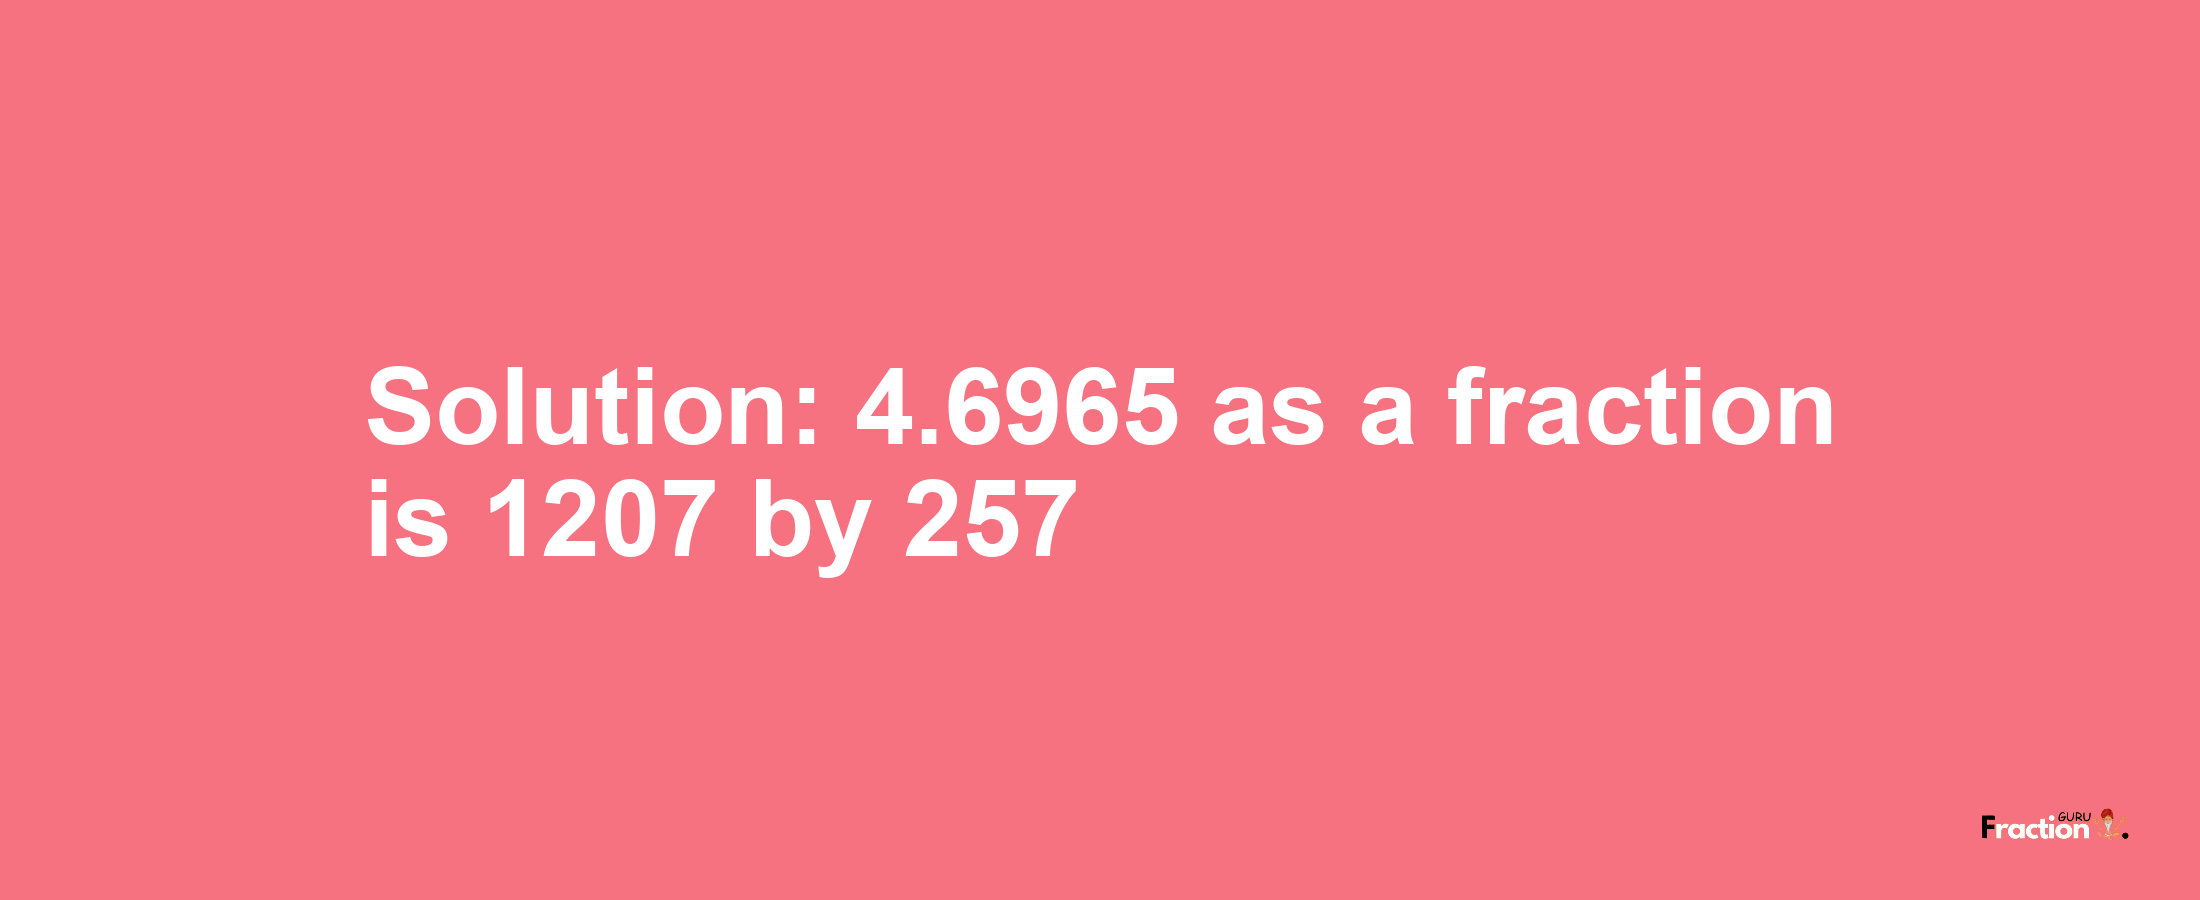 Solution:4.6965 as a fraction is 1207/257